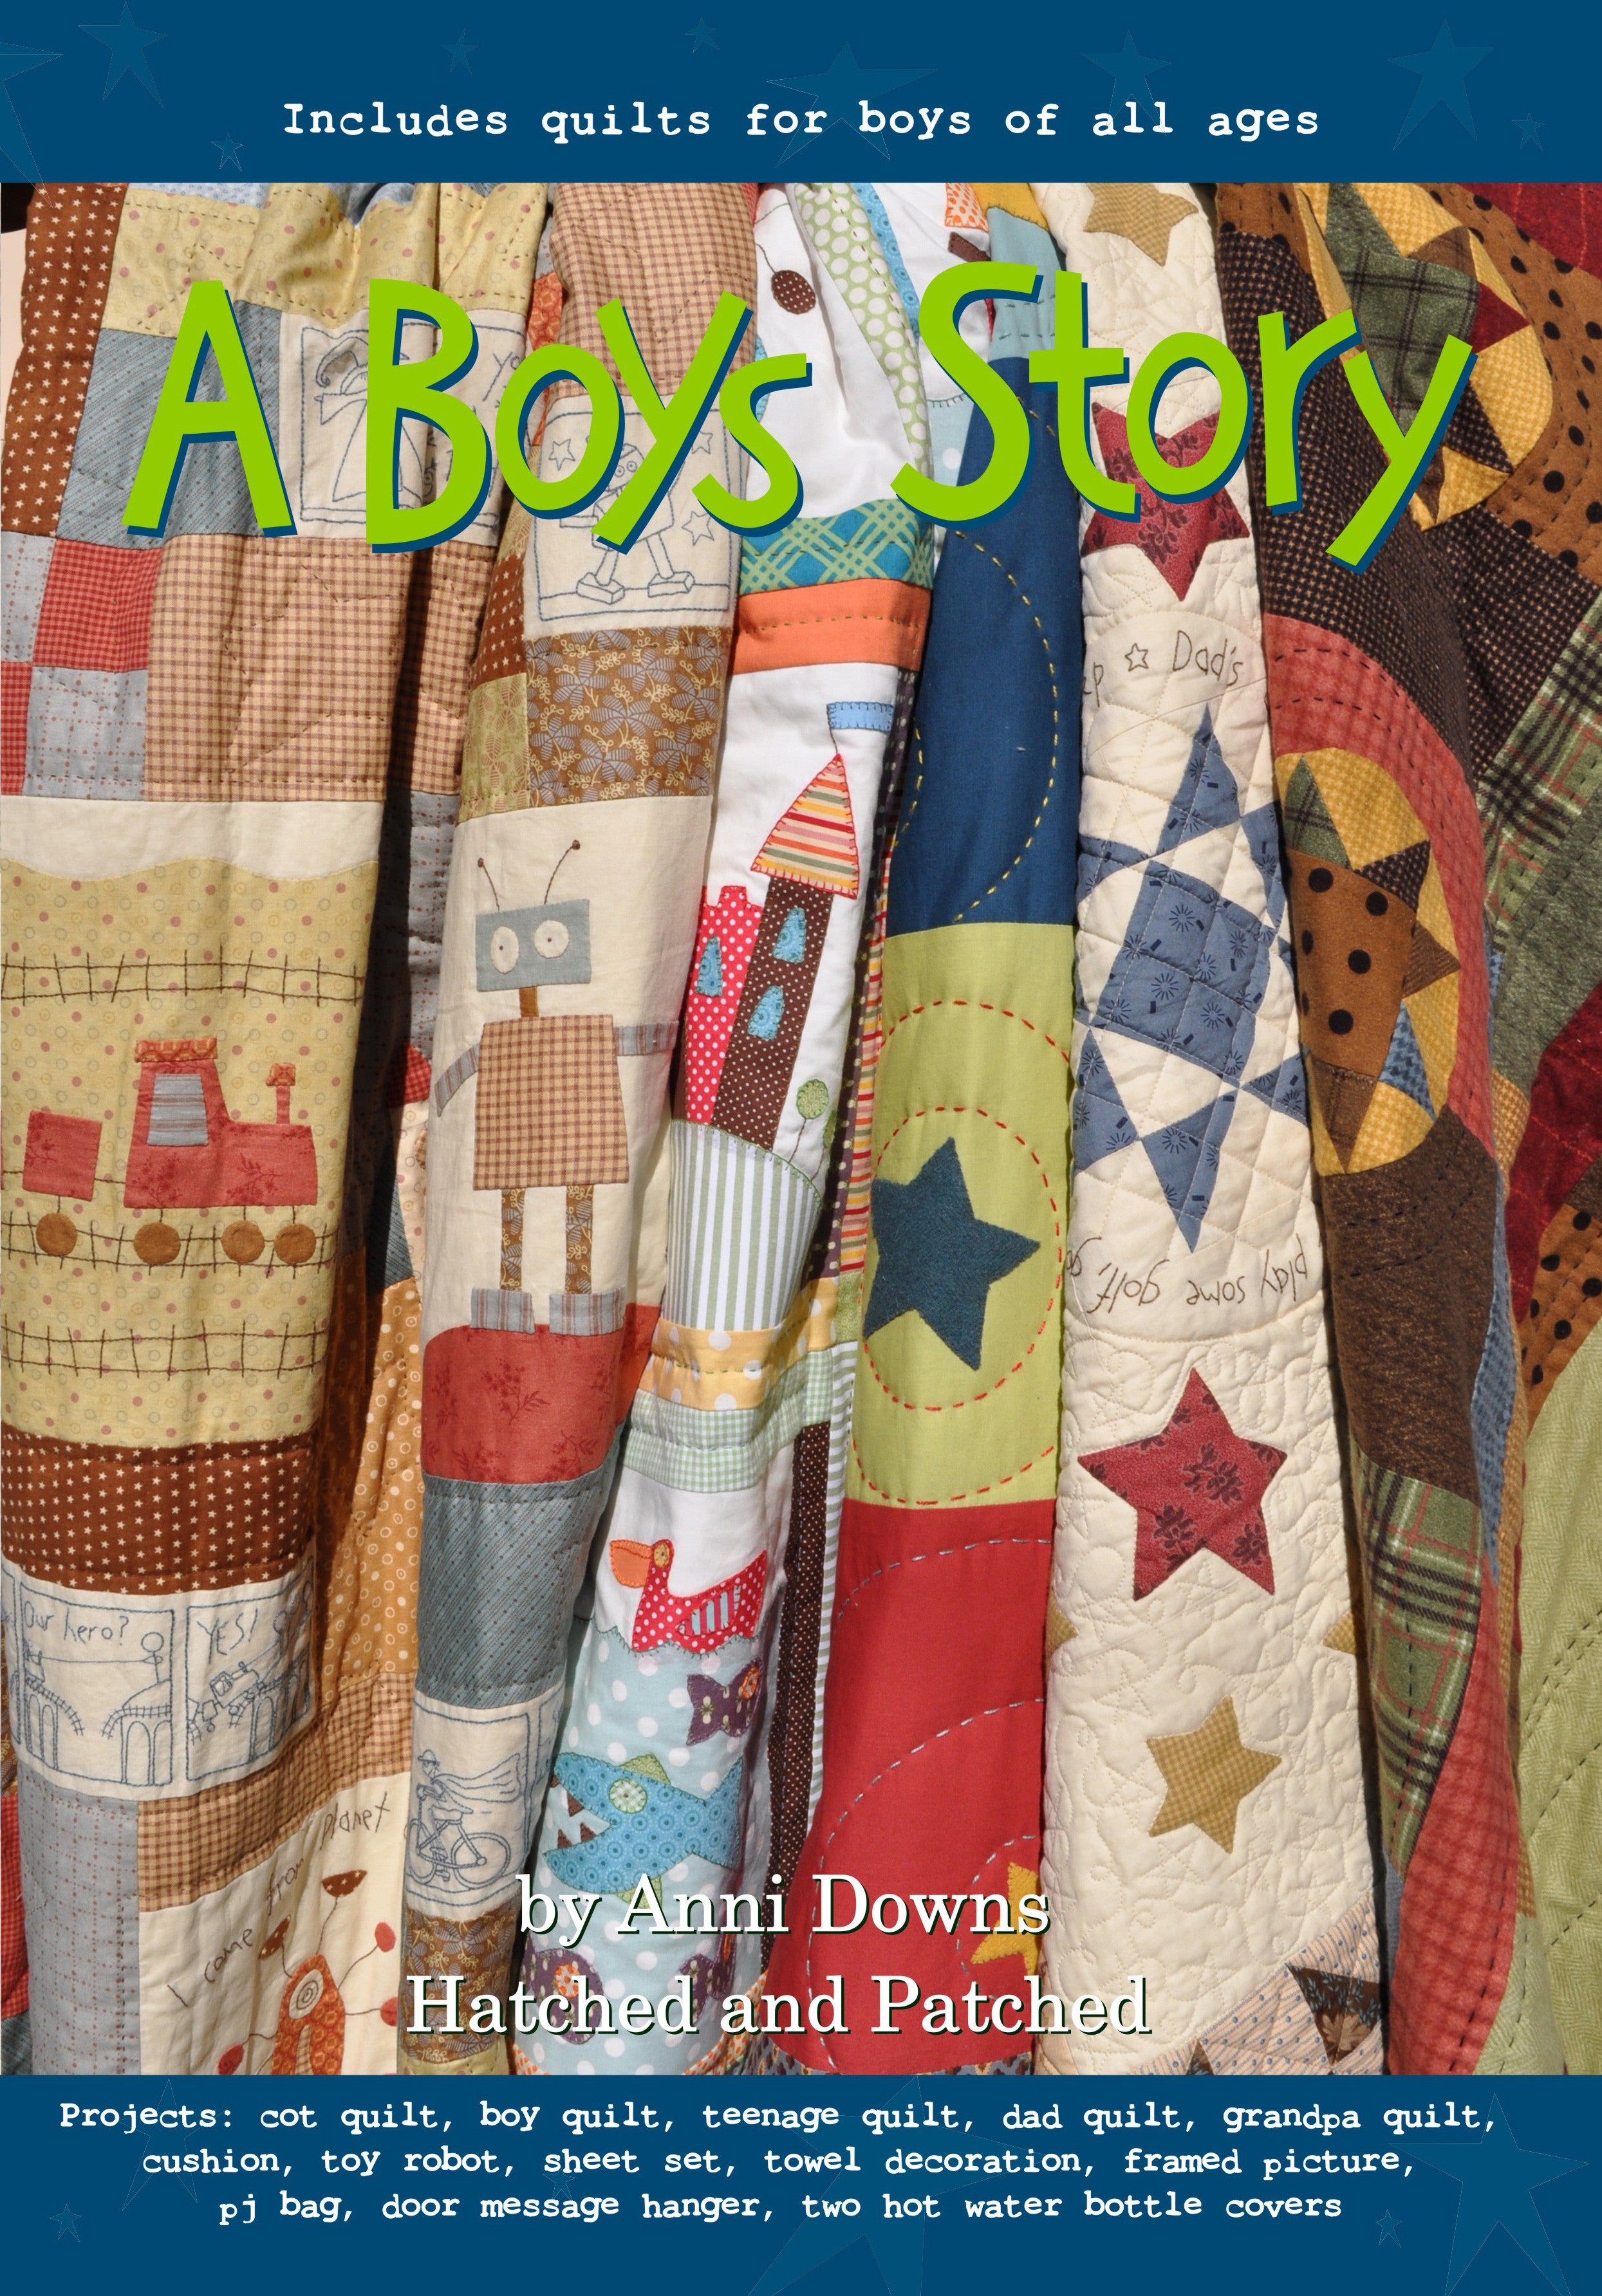 A Boys Story Quilt Pattern Book by Anni Downs of Hatched and Patched